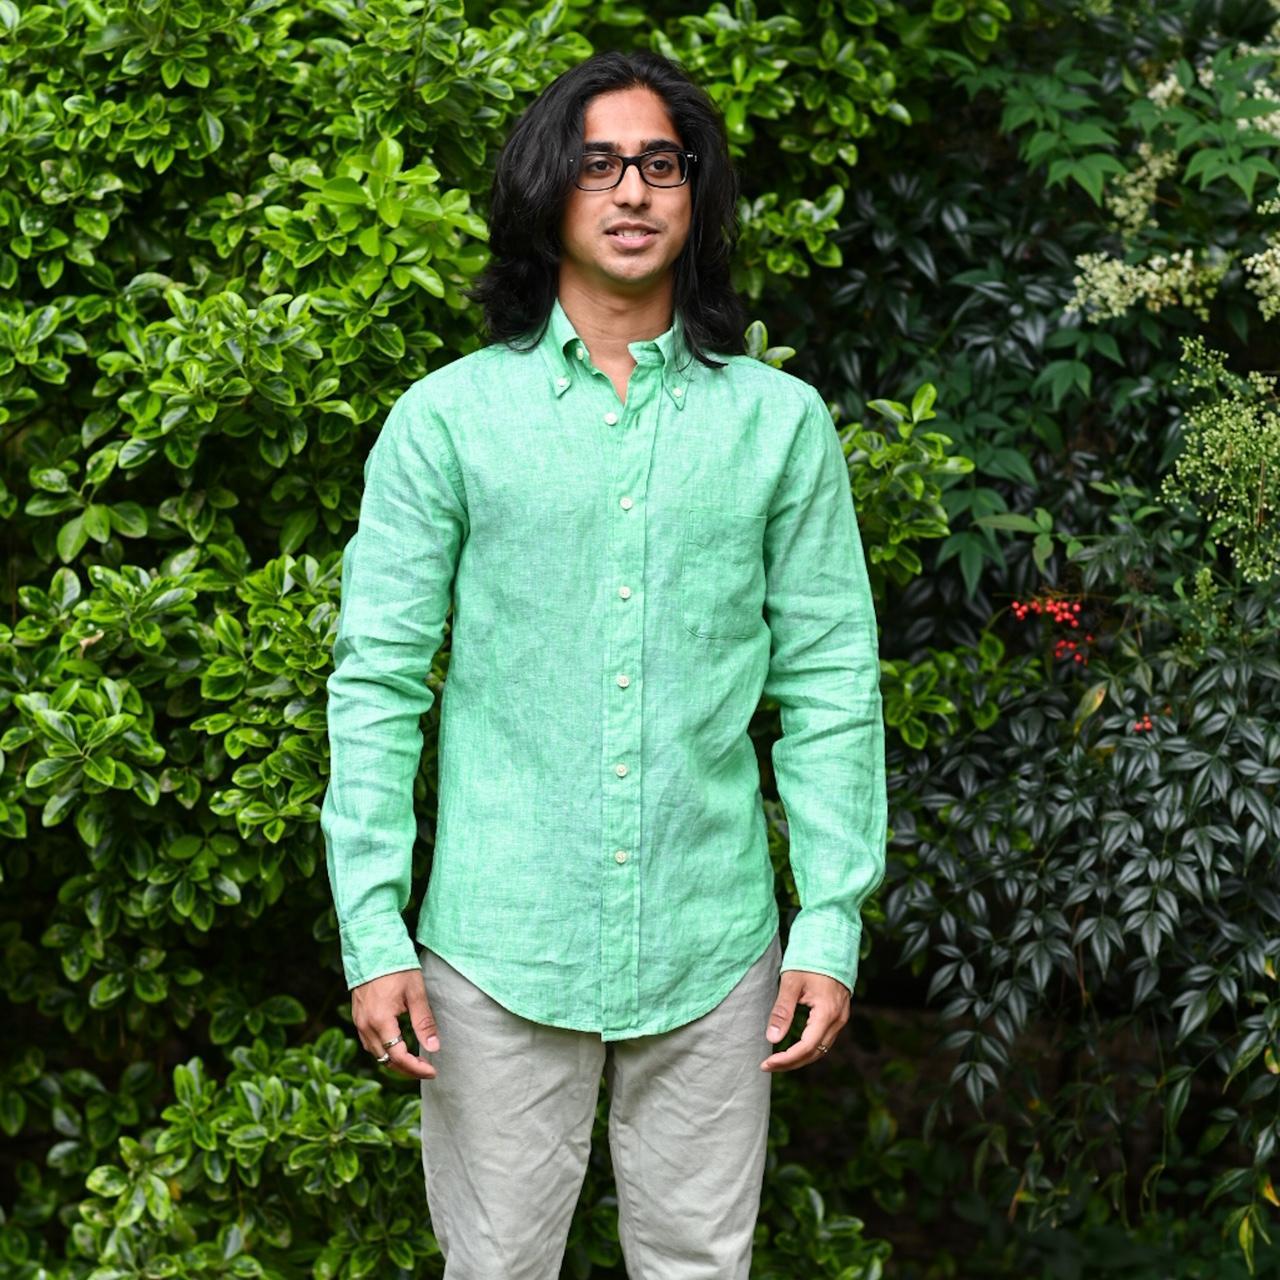 Brooks Brothers Men's Green Polo-shirts | Depop